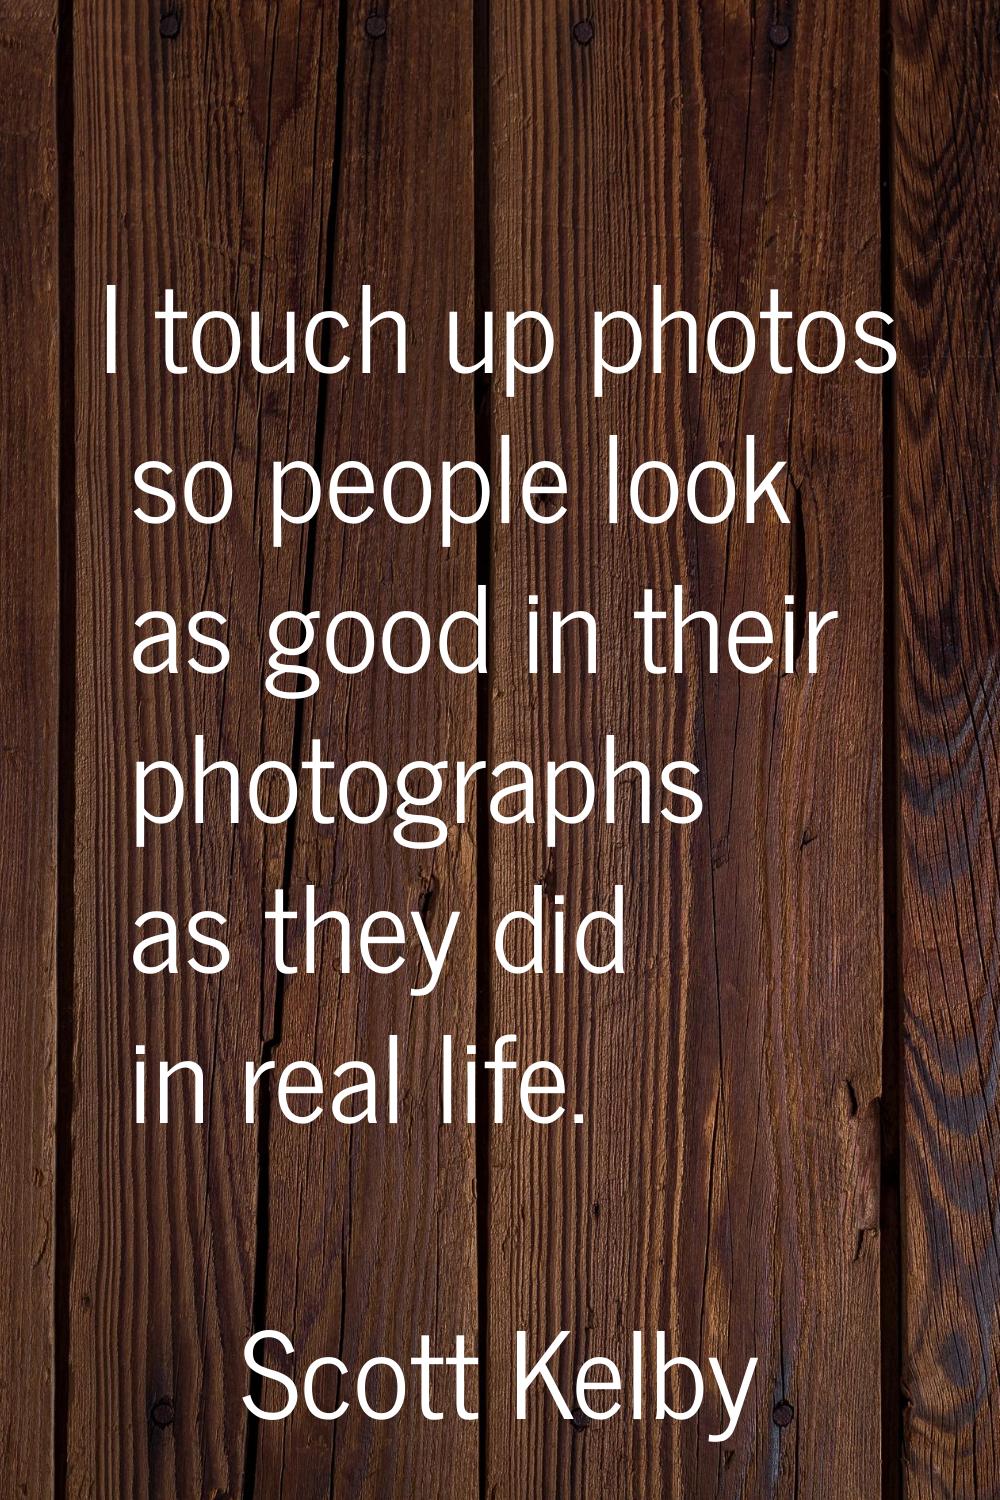 I touch up photos so people look as good in their photographs as they did in real life.